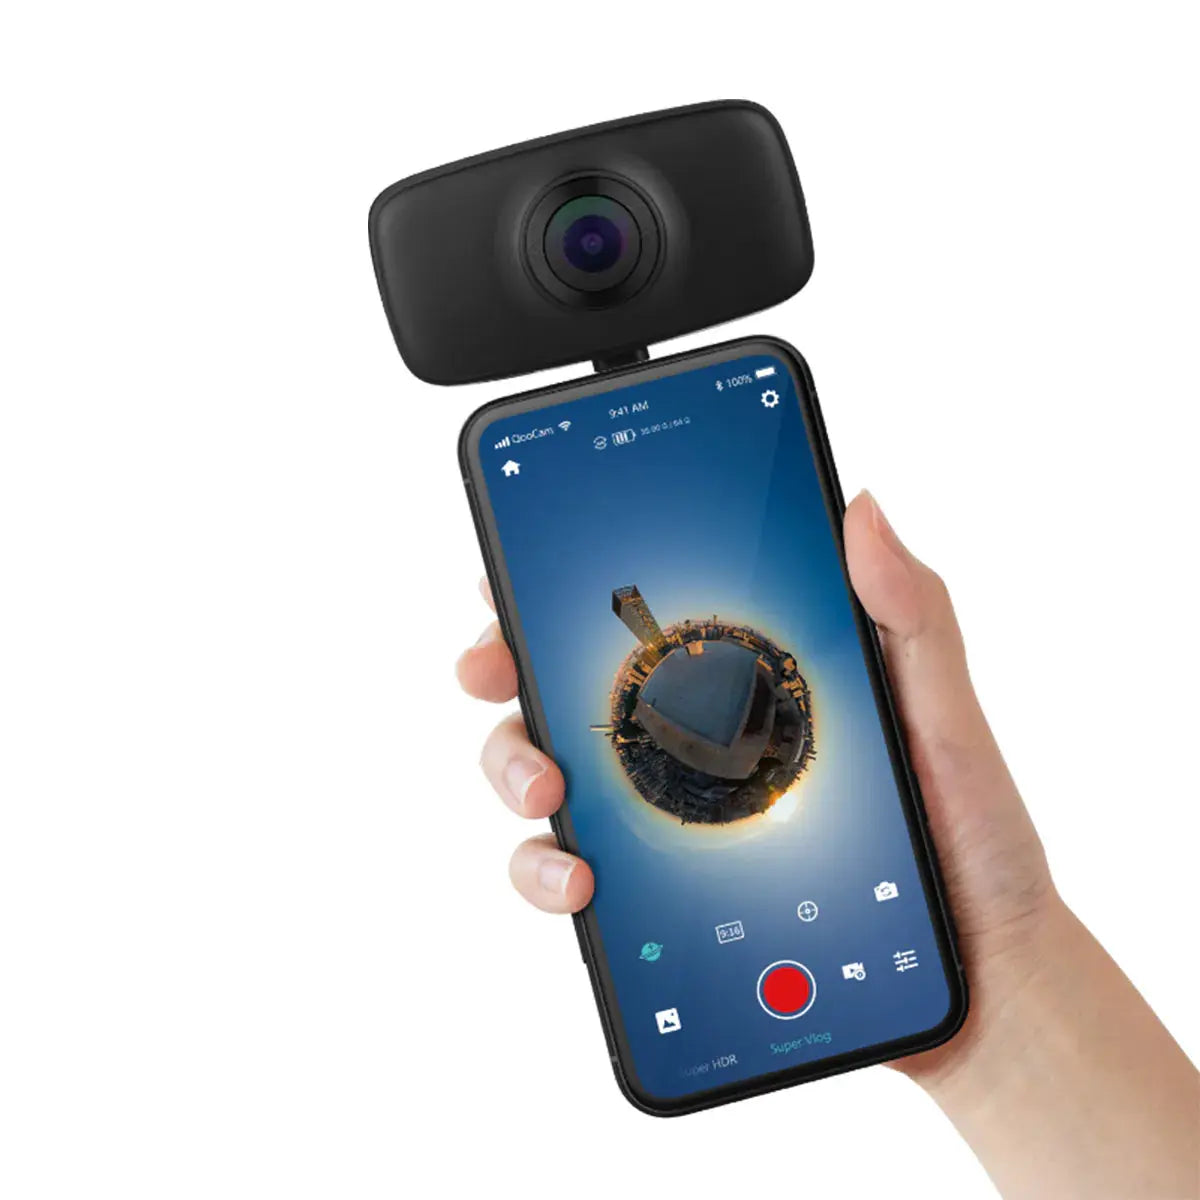 QooCam Fun Camera with Social Media Live Recording and 360 Full View Picture Capability15